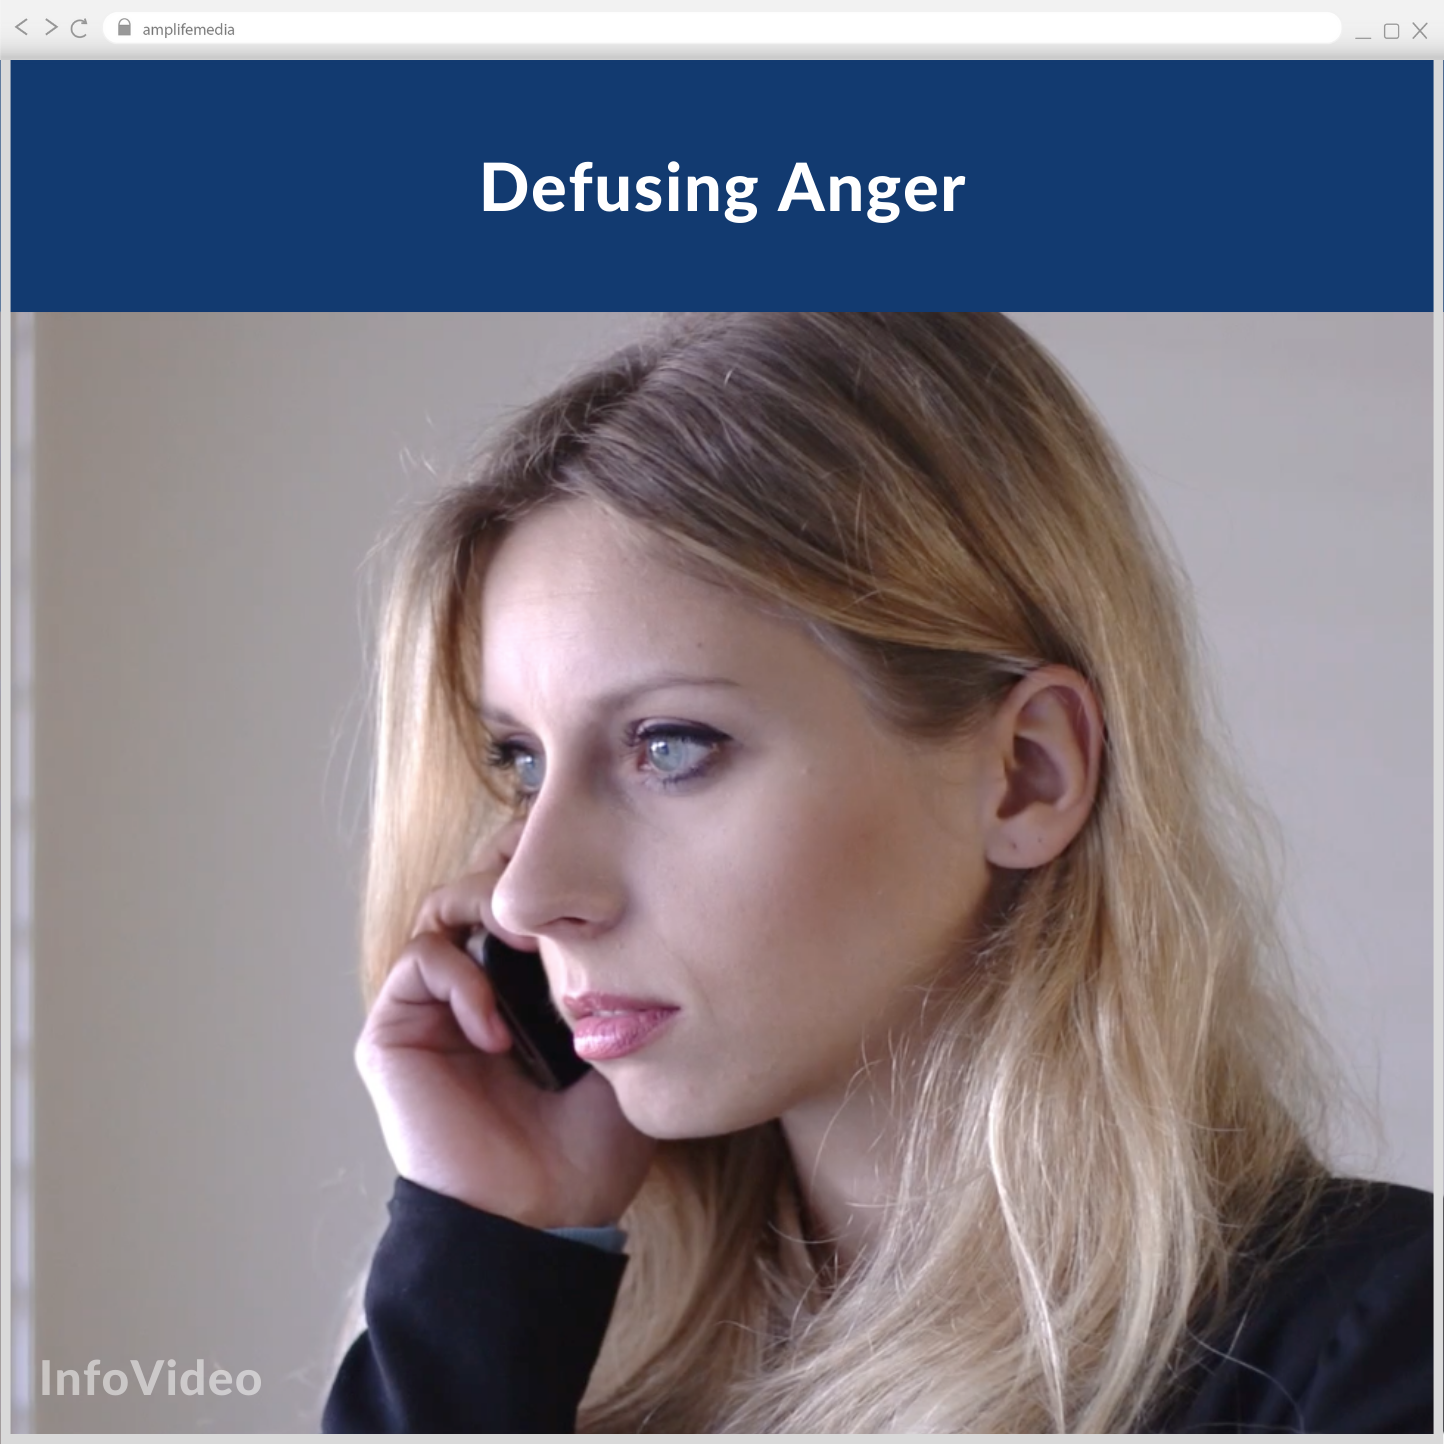 Subscription to Wellbeing Media: Defusing Anger IV 1222